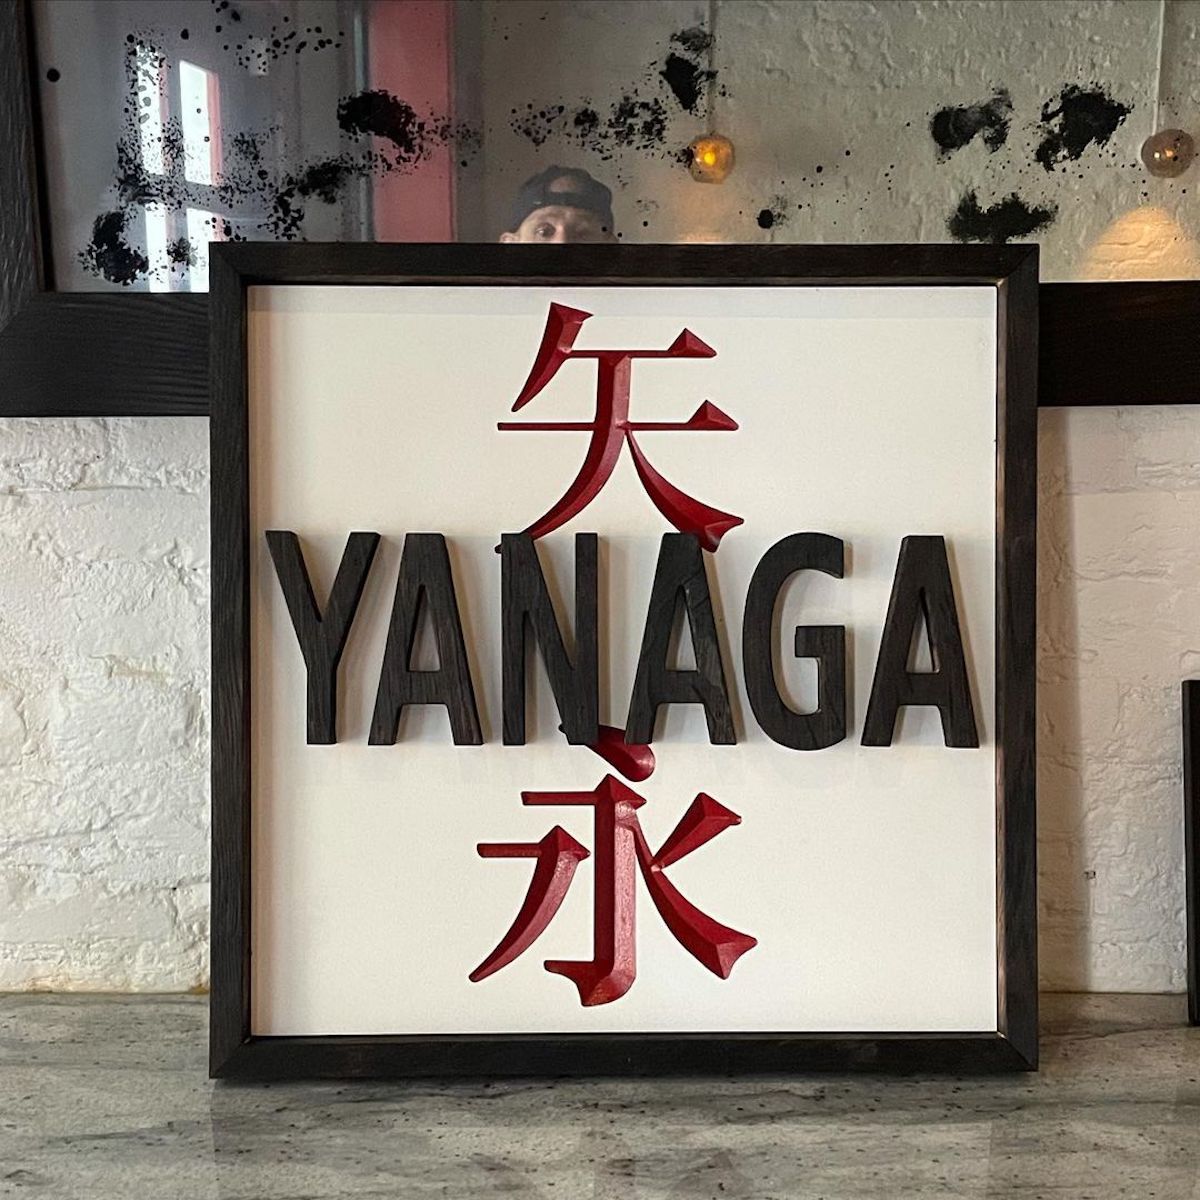 Omakase by Yanaga Pushes Opening to the New Year